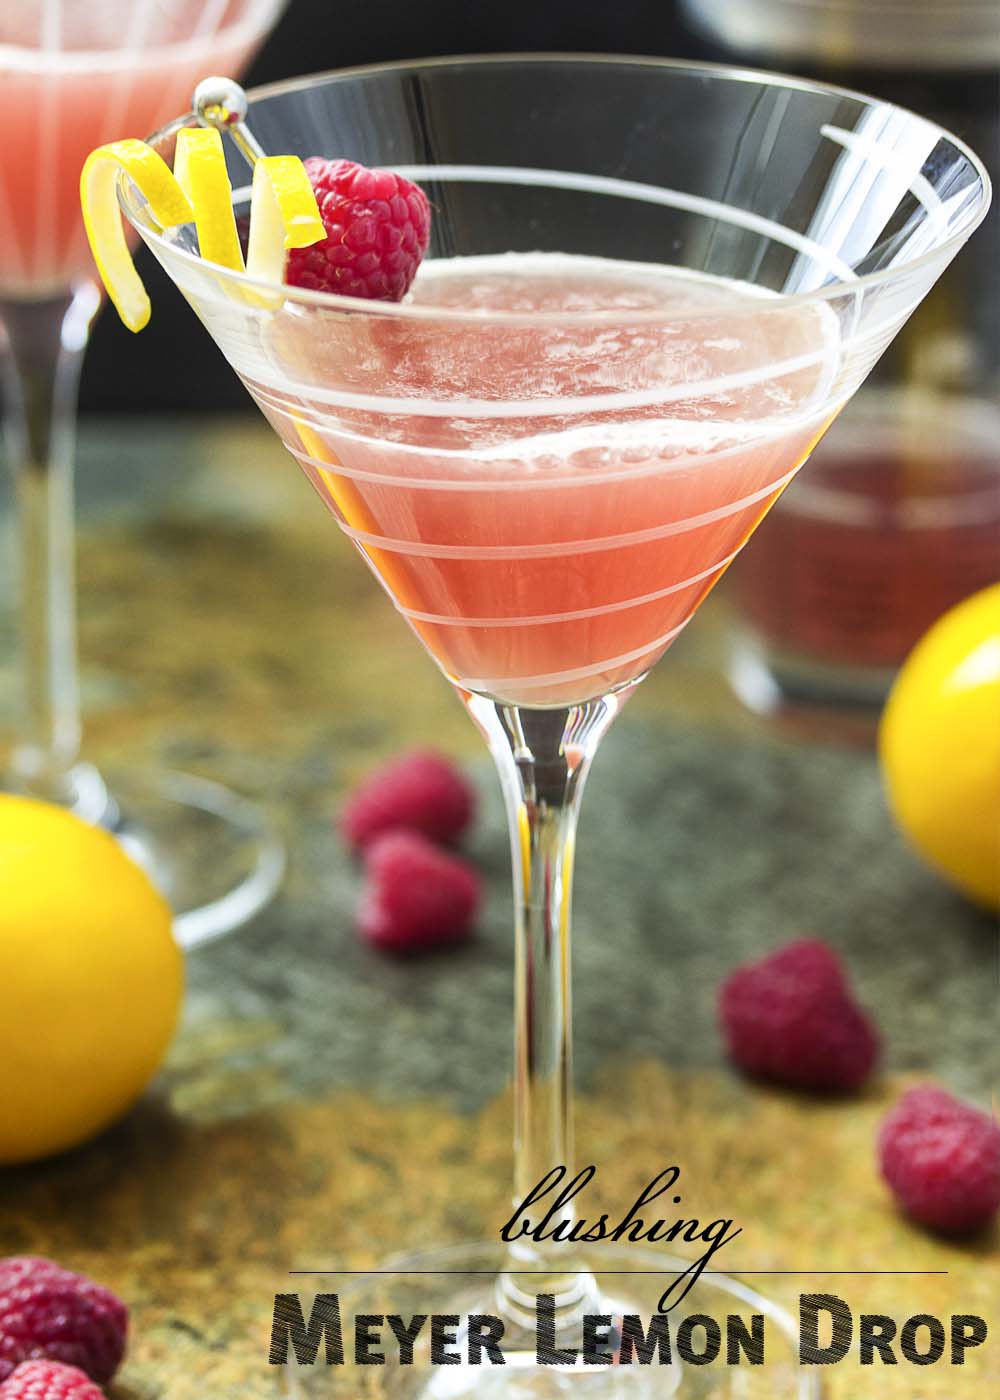 This blushing meyer lemon drop is a martini with a twist! Vodka is mixed with floral Meyer lemon juice and spiked with a bit of raspberry liqueur to make a great sweet and sour cocktail. | justalittlebitofbacon.com